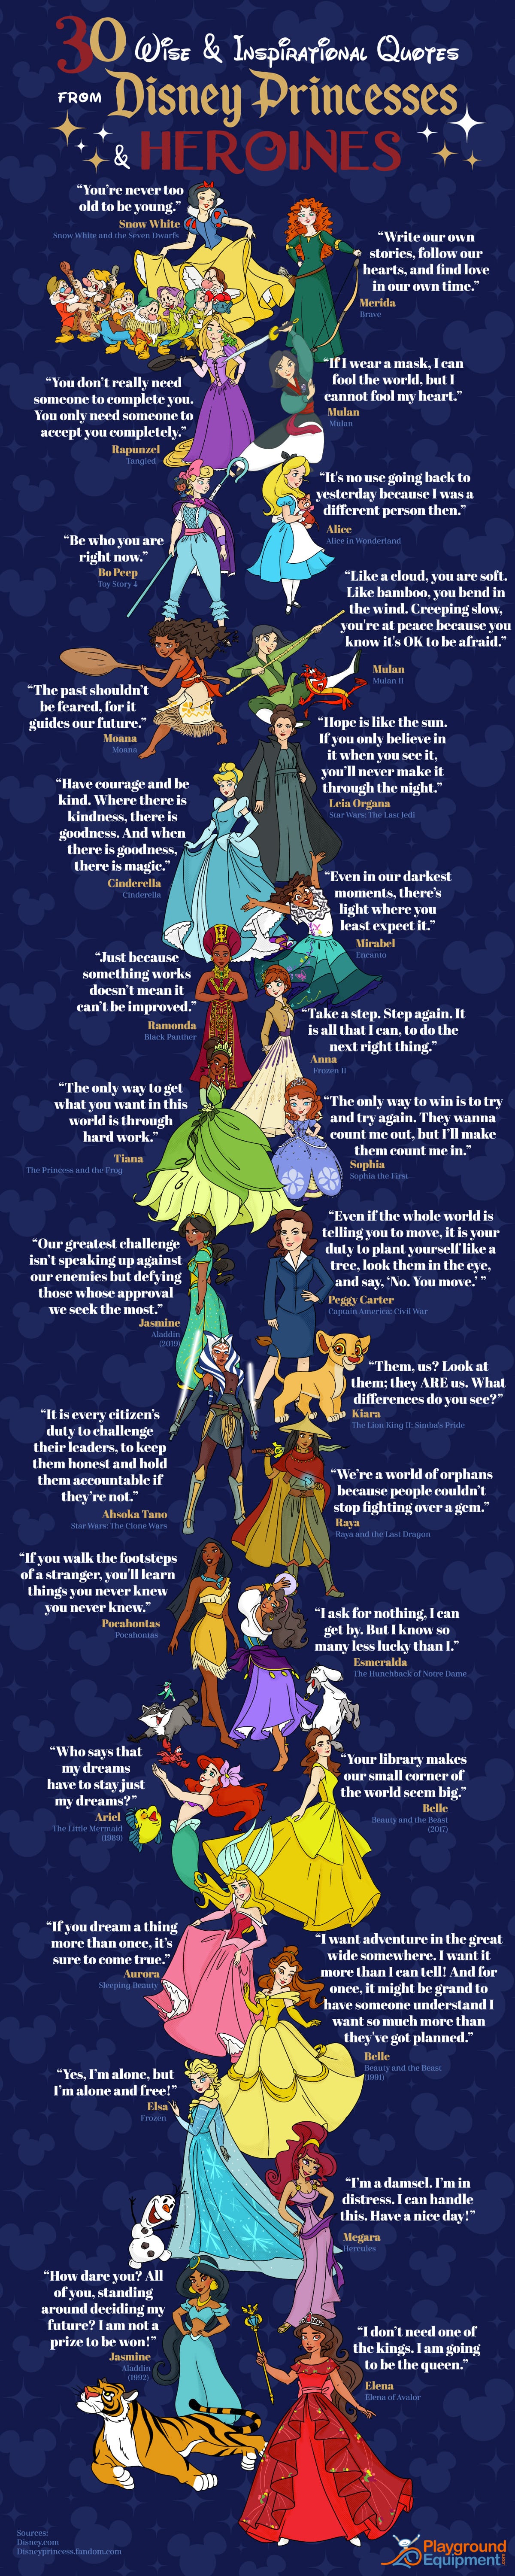 30 Inspirational Quotes from Disney Princesses and Heroines - Infographic